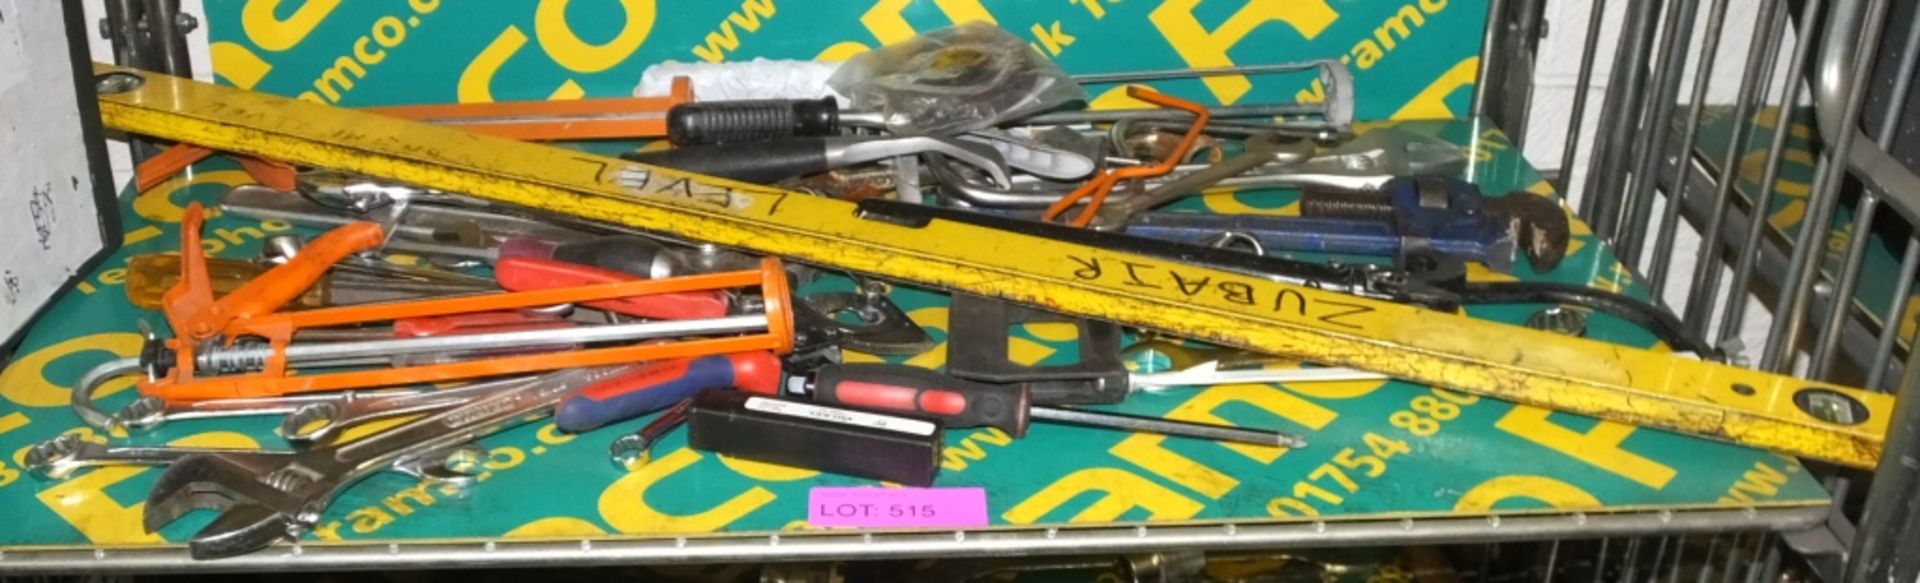 Hand Tools - Spirit Level, Screwdrivers, Adjustable Wrench, Spanners